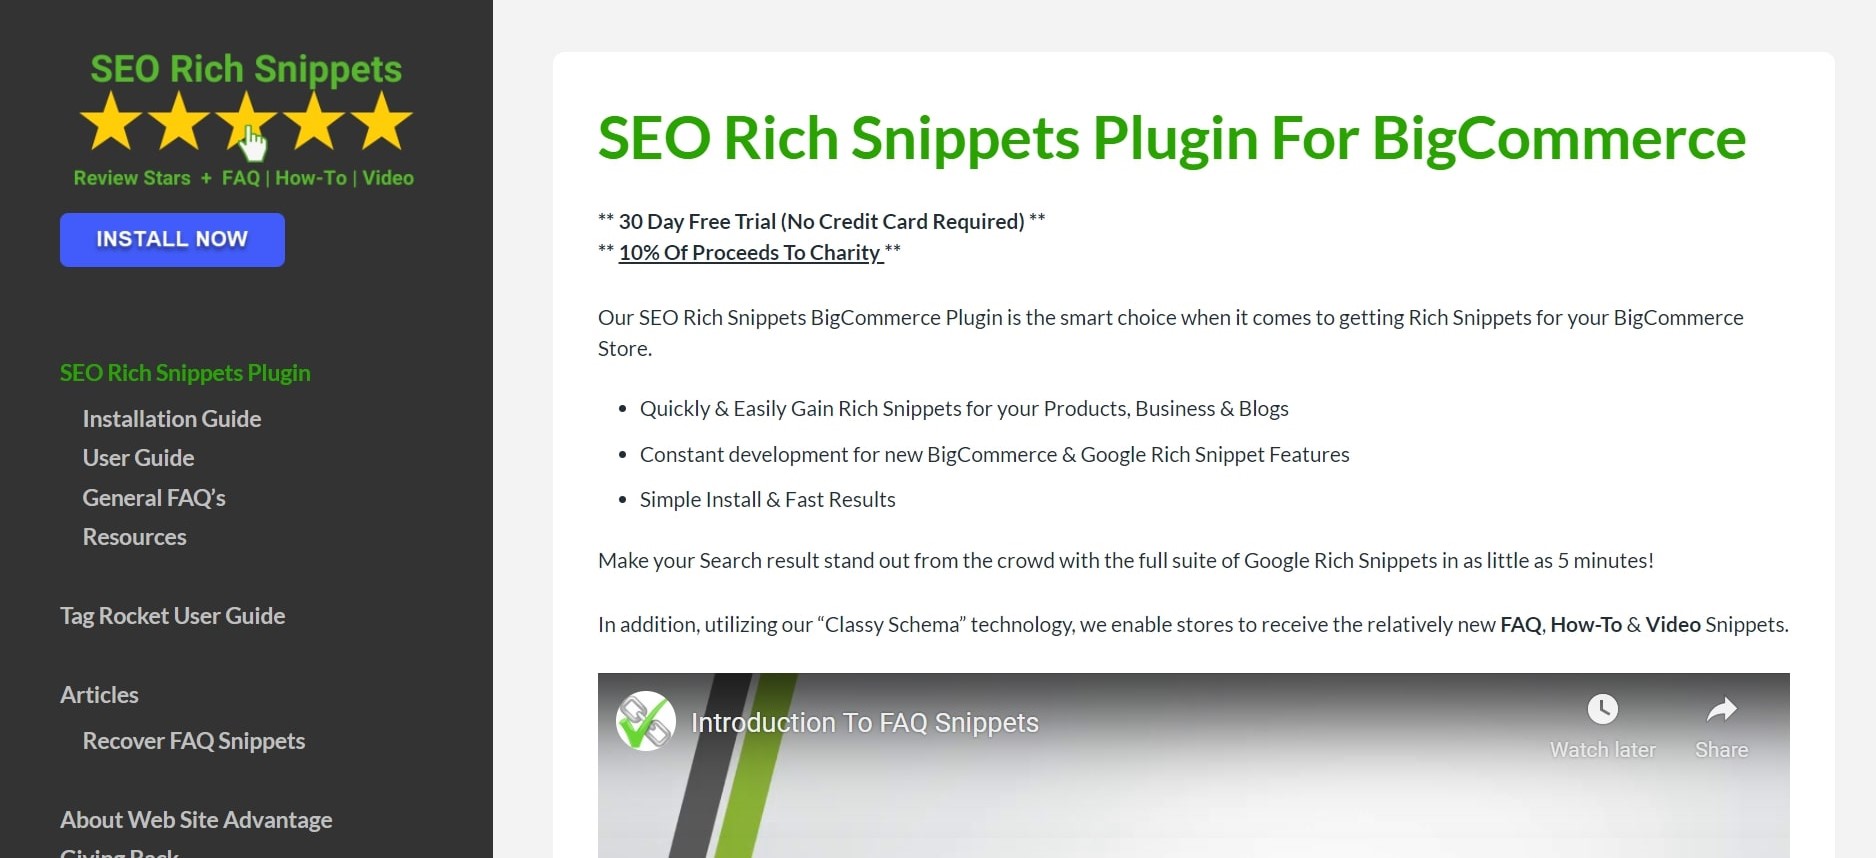 SEO Rich Snippets